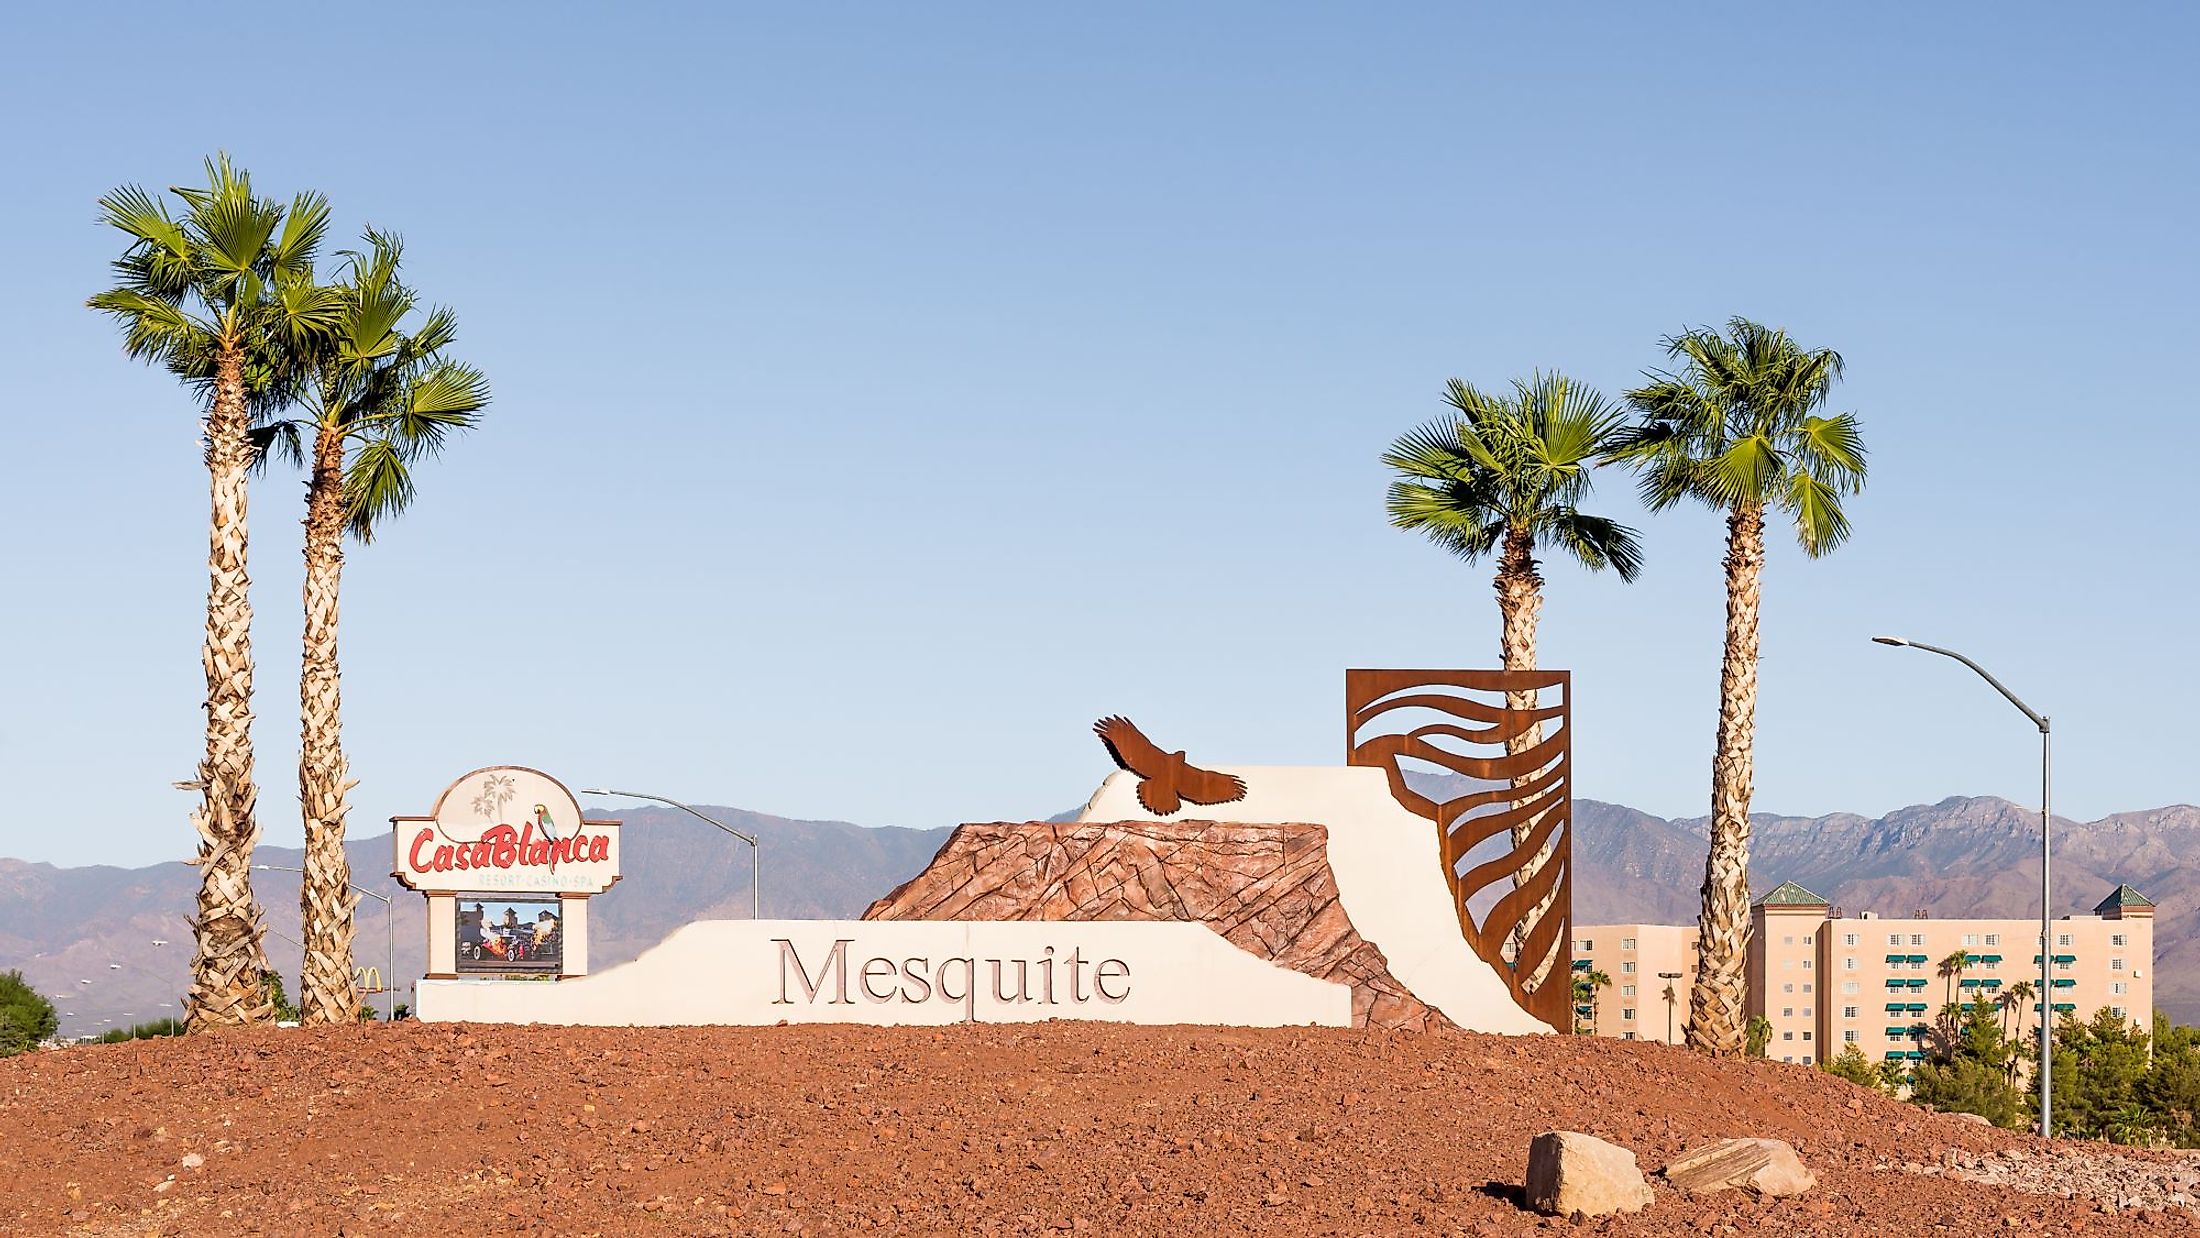 A Mesquite, Nevada welcome sculpture and palm trees fronts the Casa Blanca Resort & Casino. Editorial credit: Steve Lagreca / Shutterstock.com